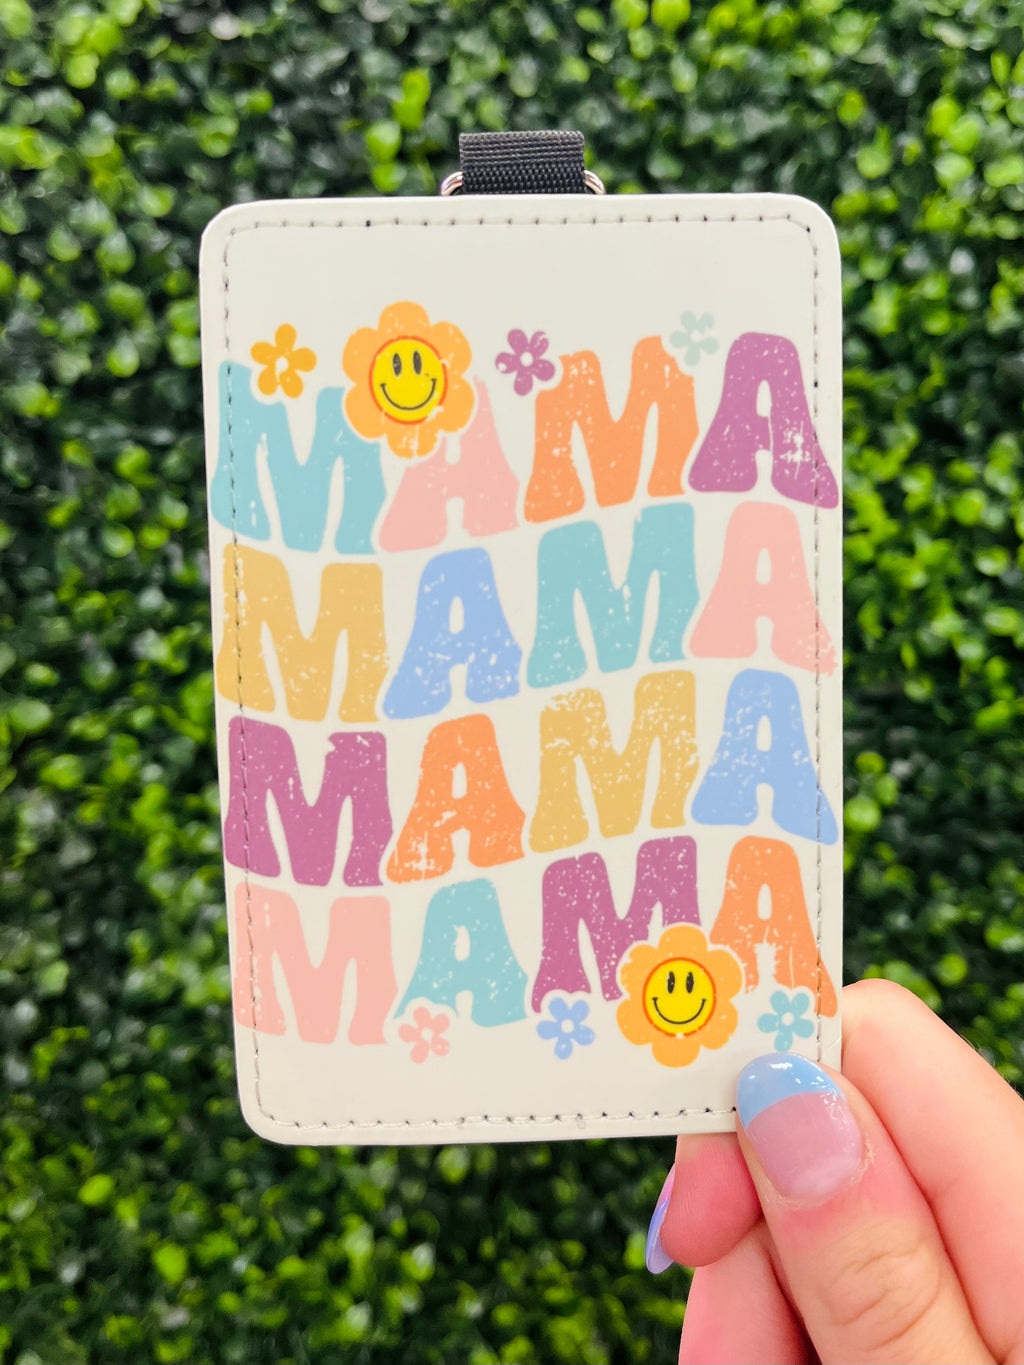 Retro is back and stronger than ever with this funky Mama Card Holder Keychain! Featuring bold flower details and a sleek design, it's the perfect way to keep your cards safe and sound on-the-go. So stay organized and stylish with this one-of-a-kind keychain!